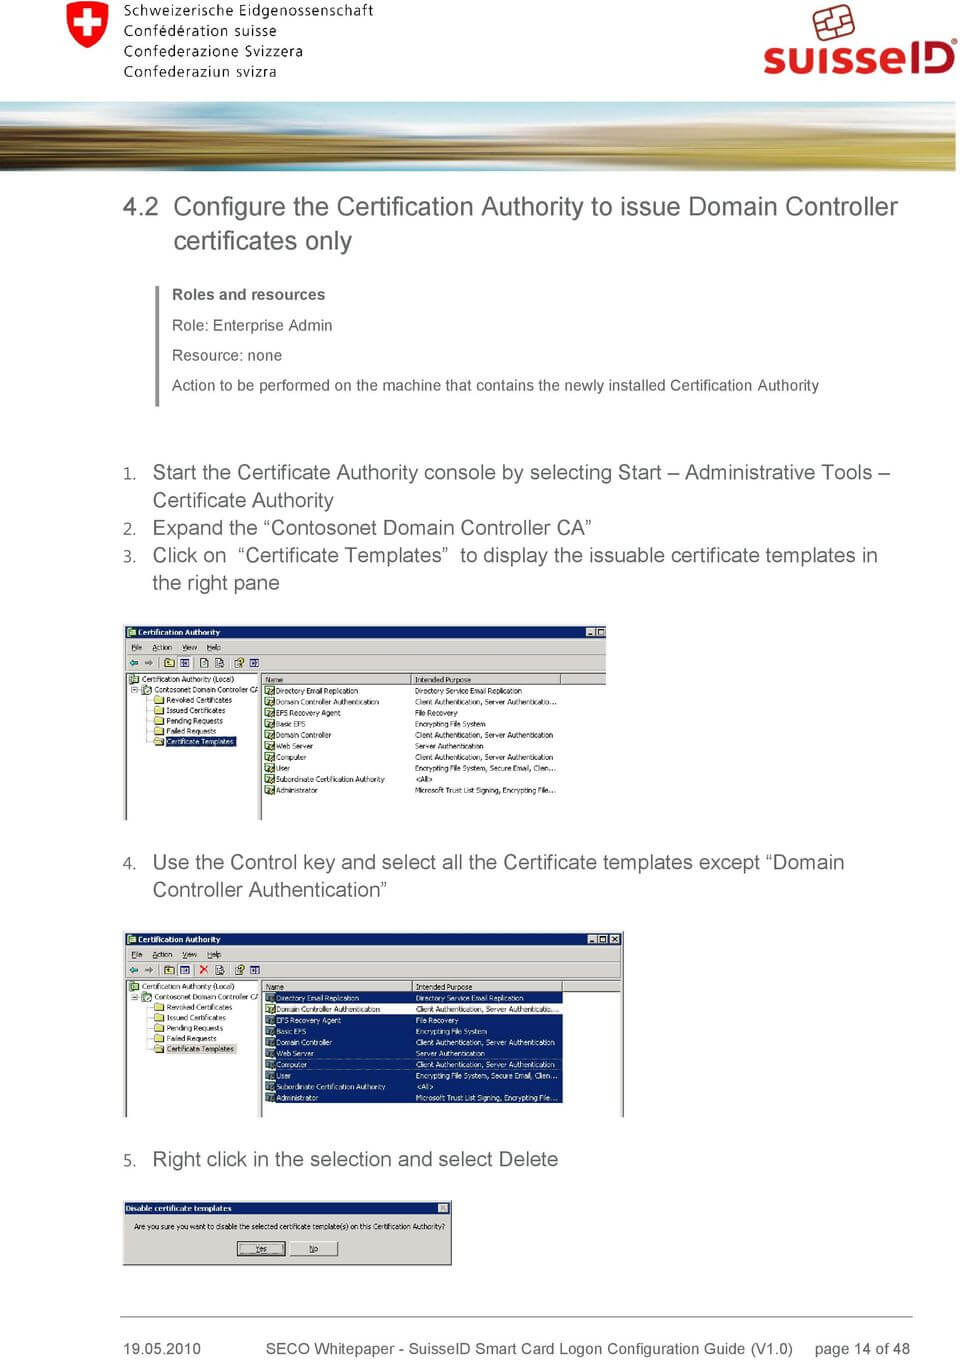 Seco Whitepaper. Suisseid Smart Card Logon Configuration With Domain Controller Certificate Template